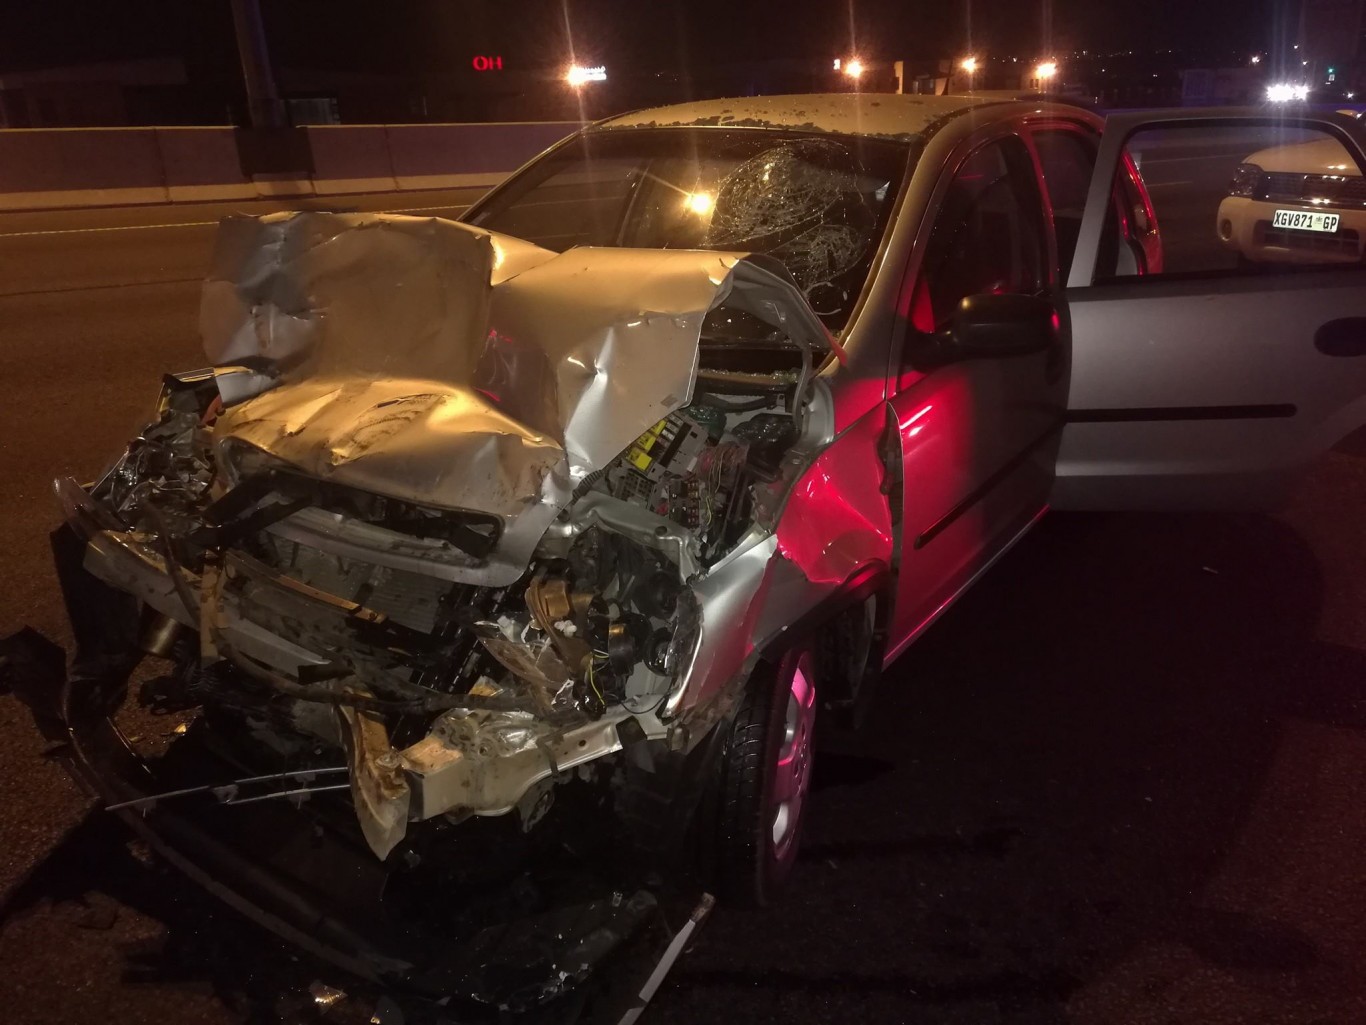 Unrestrained driver injured in 5 car pile-up on N1 South at Paulshof